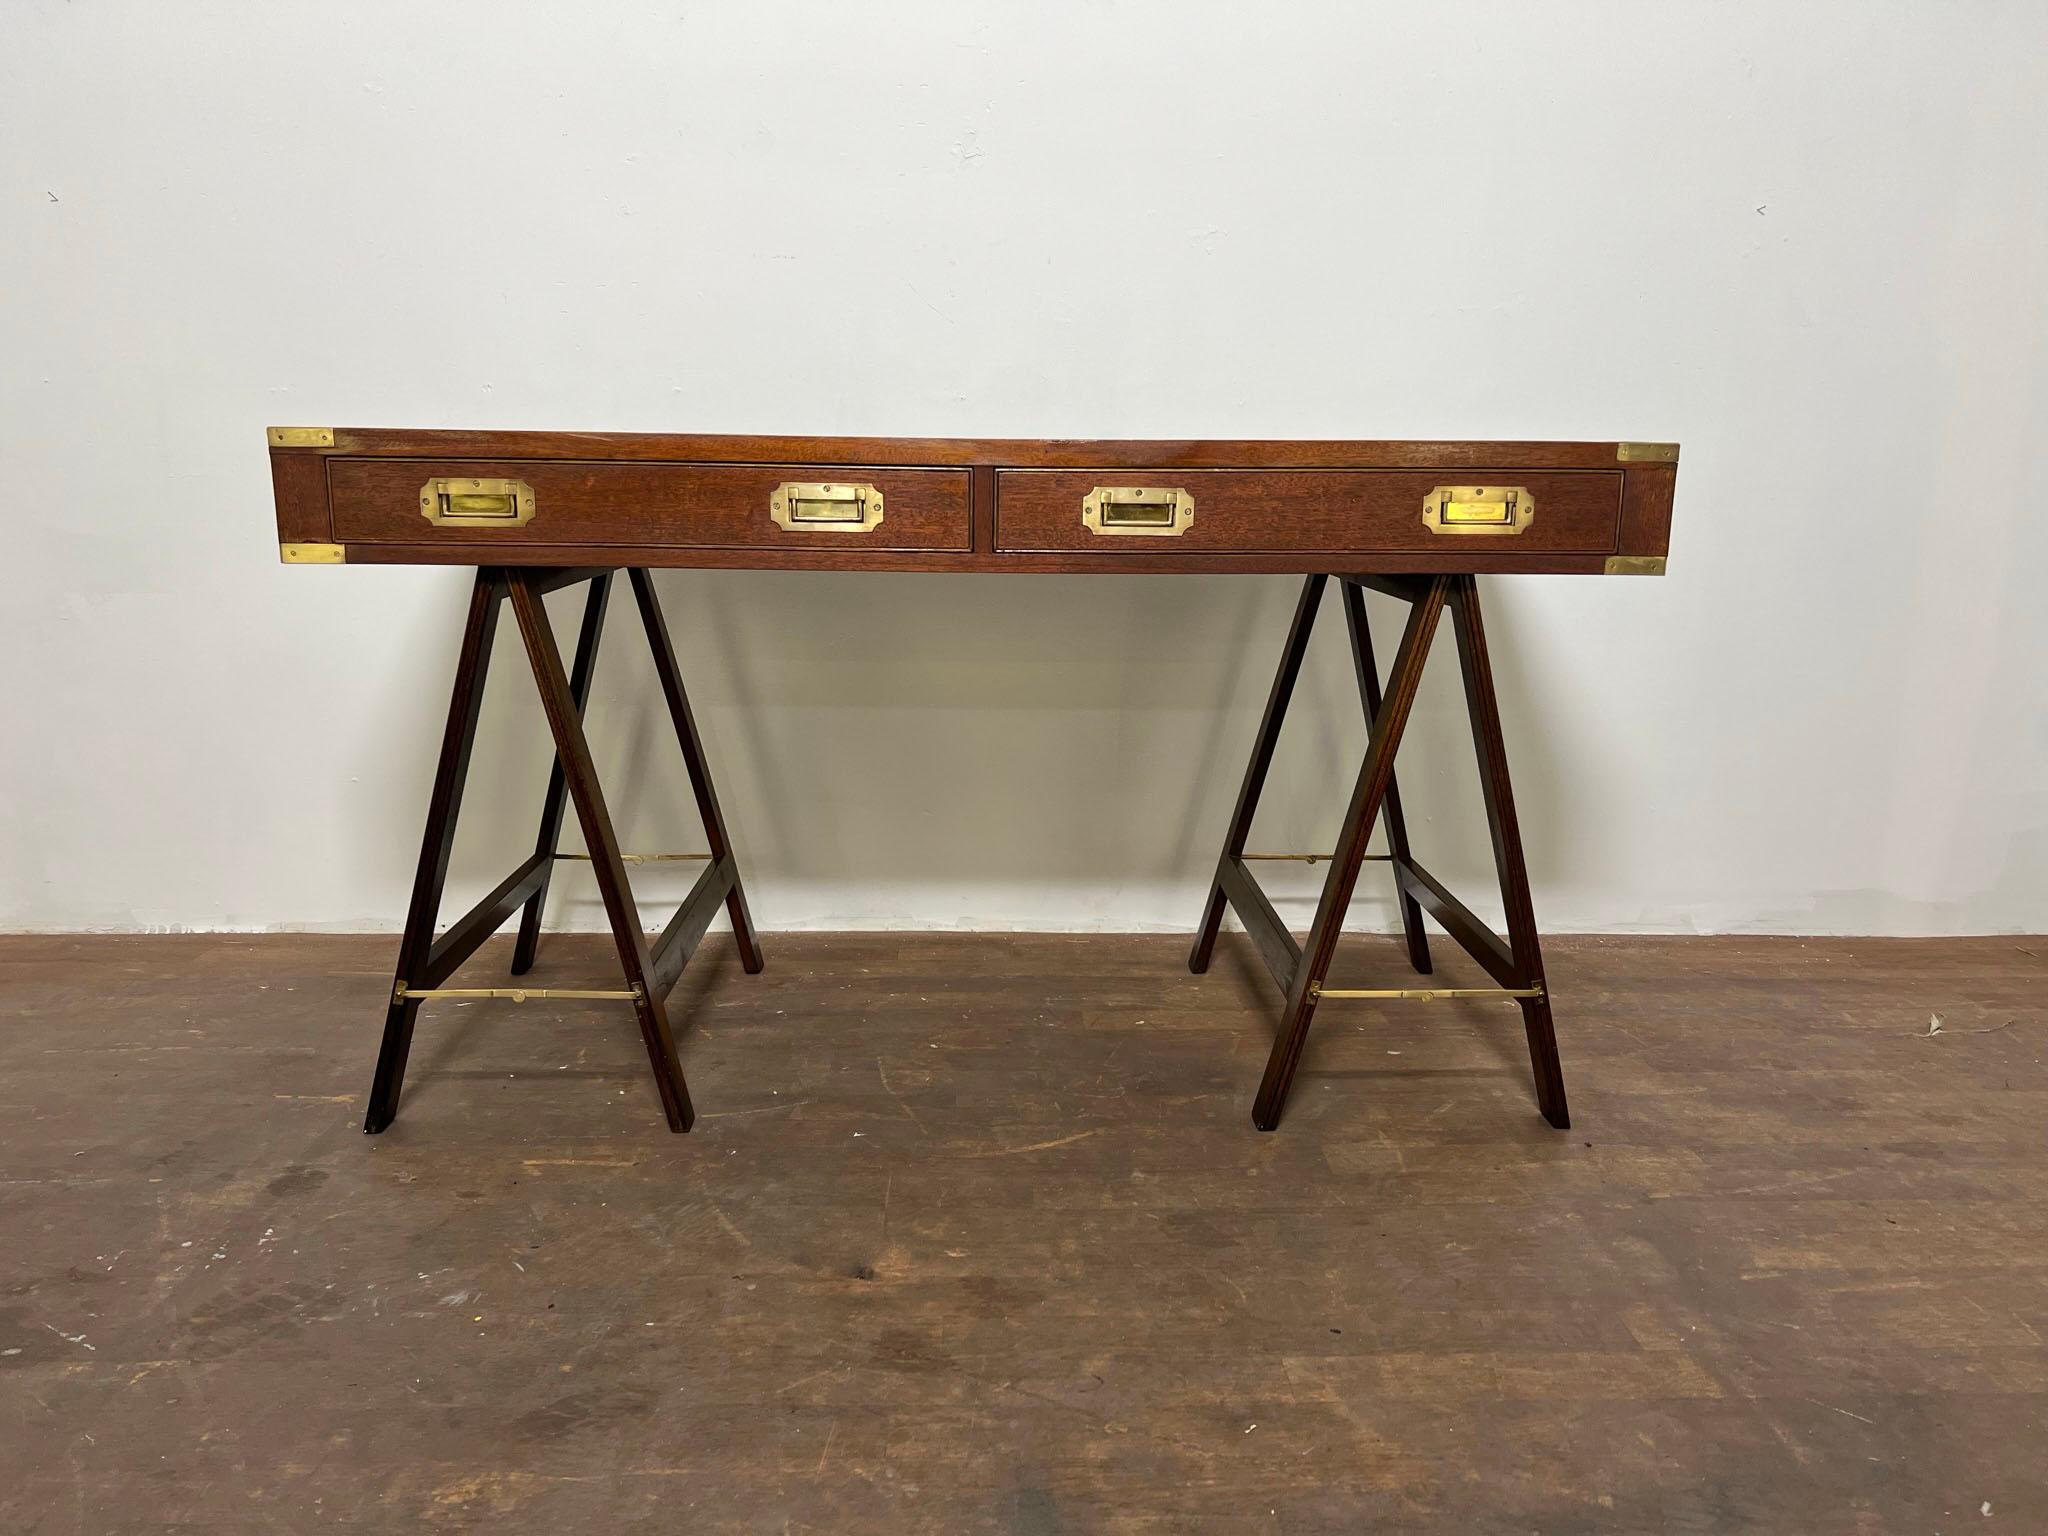 An English campaign desk in mahogany with leather top and solid brass hardware, circa 1950s..
